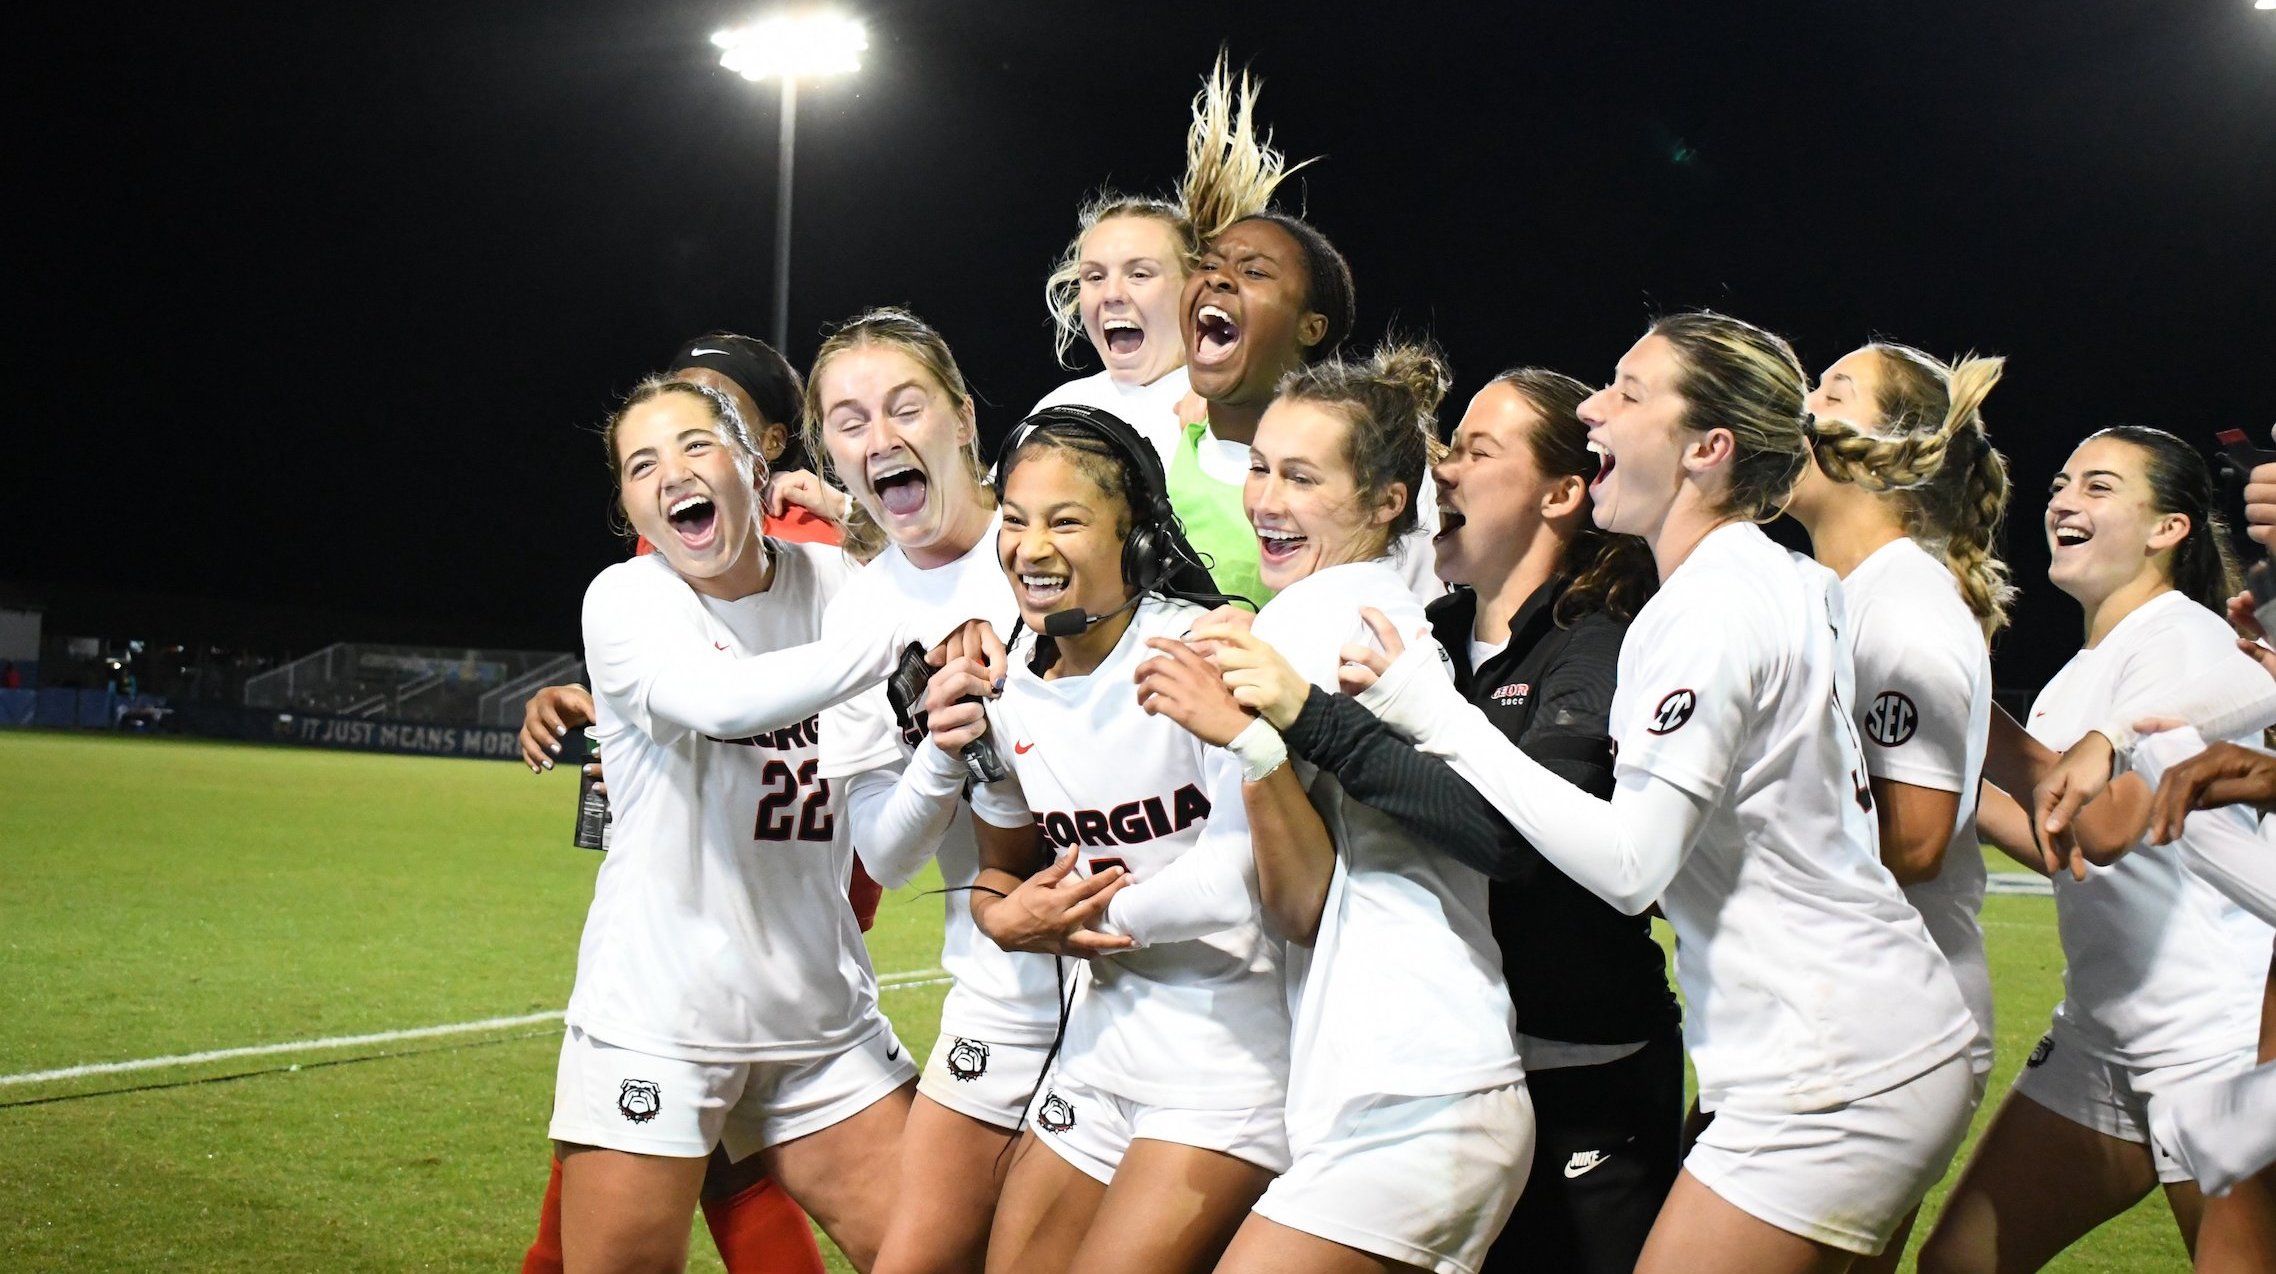 No. 16 women's soccer clinches Ivy Tournament Berth in tough